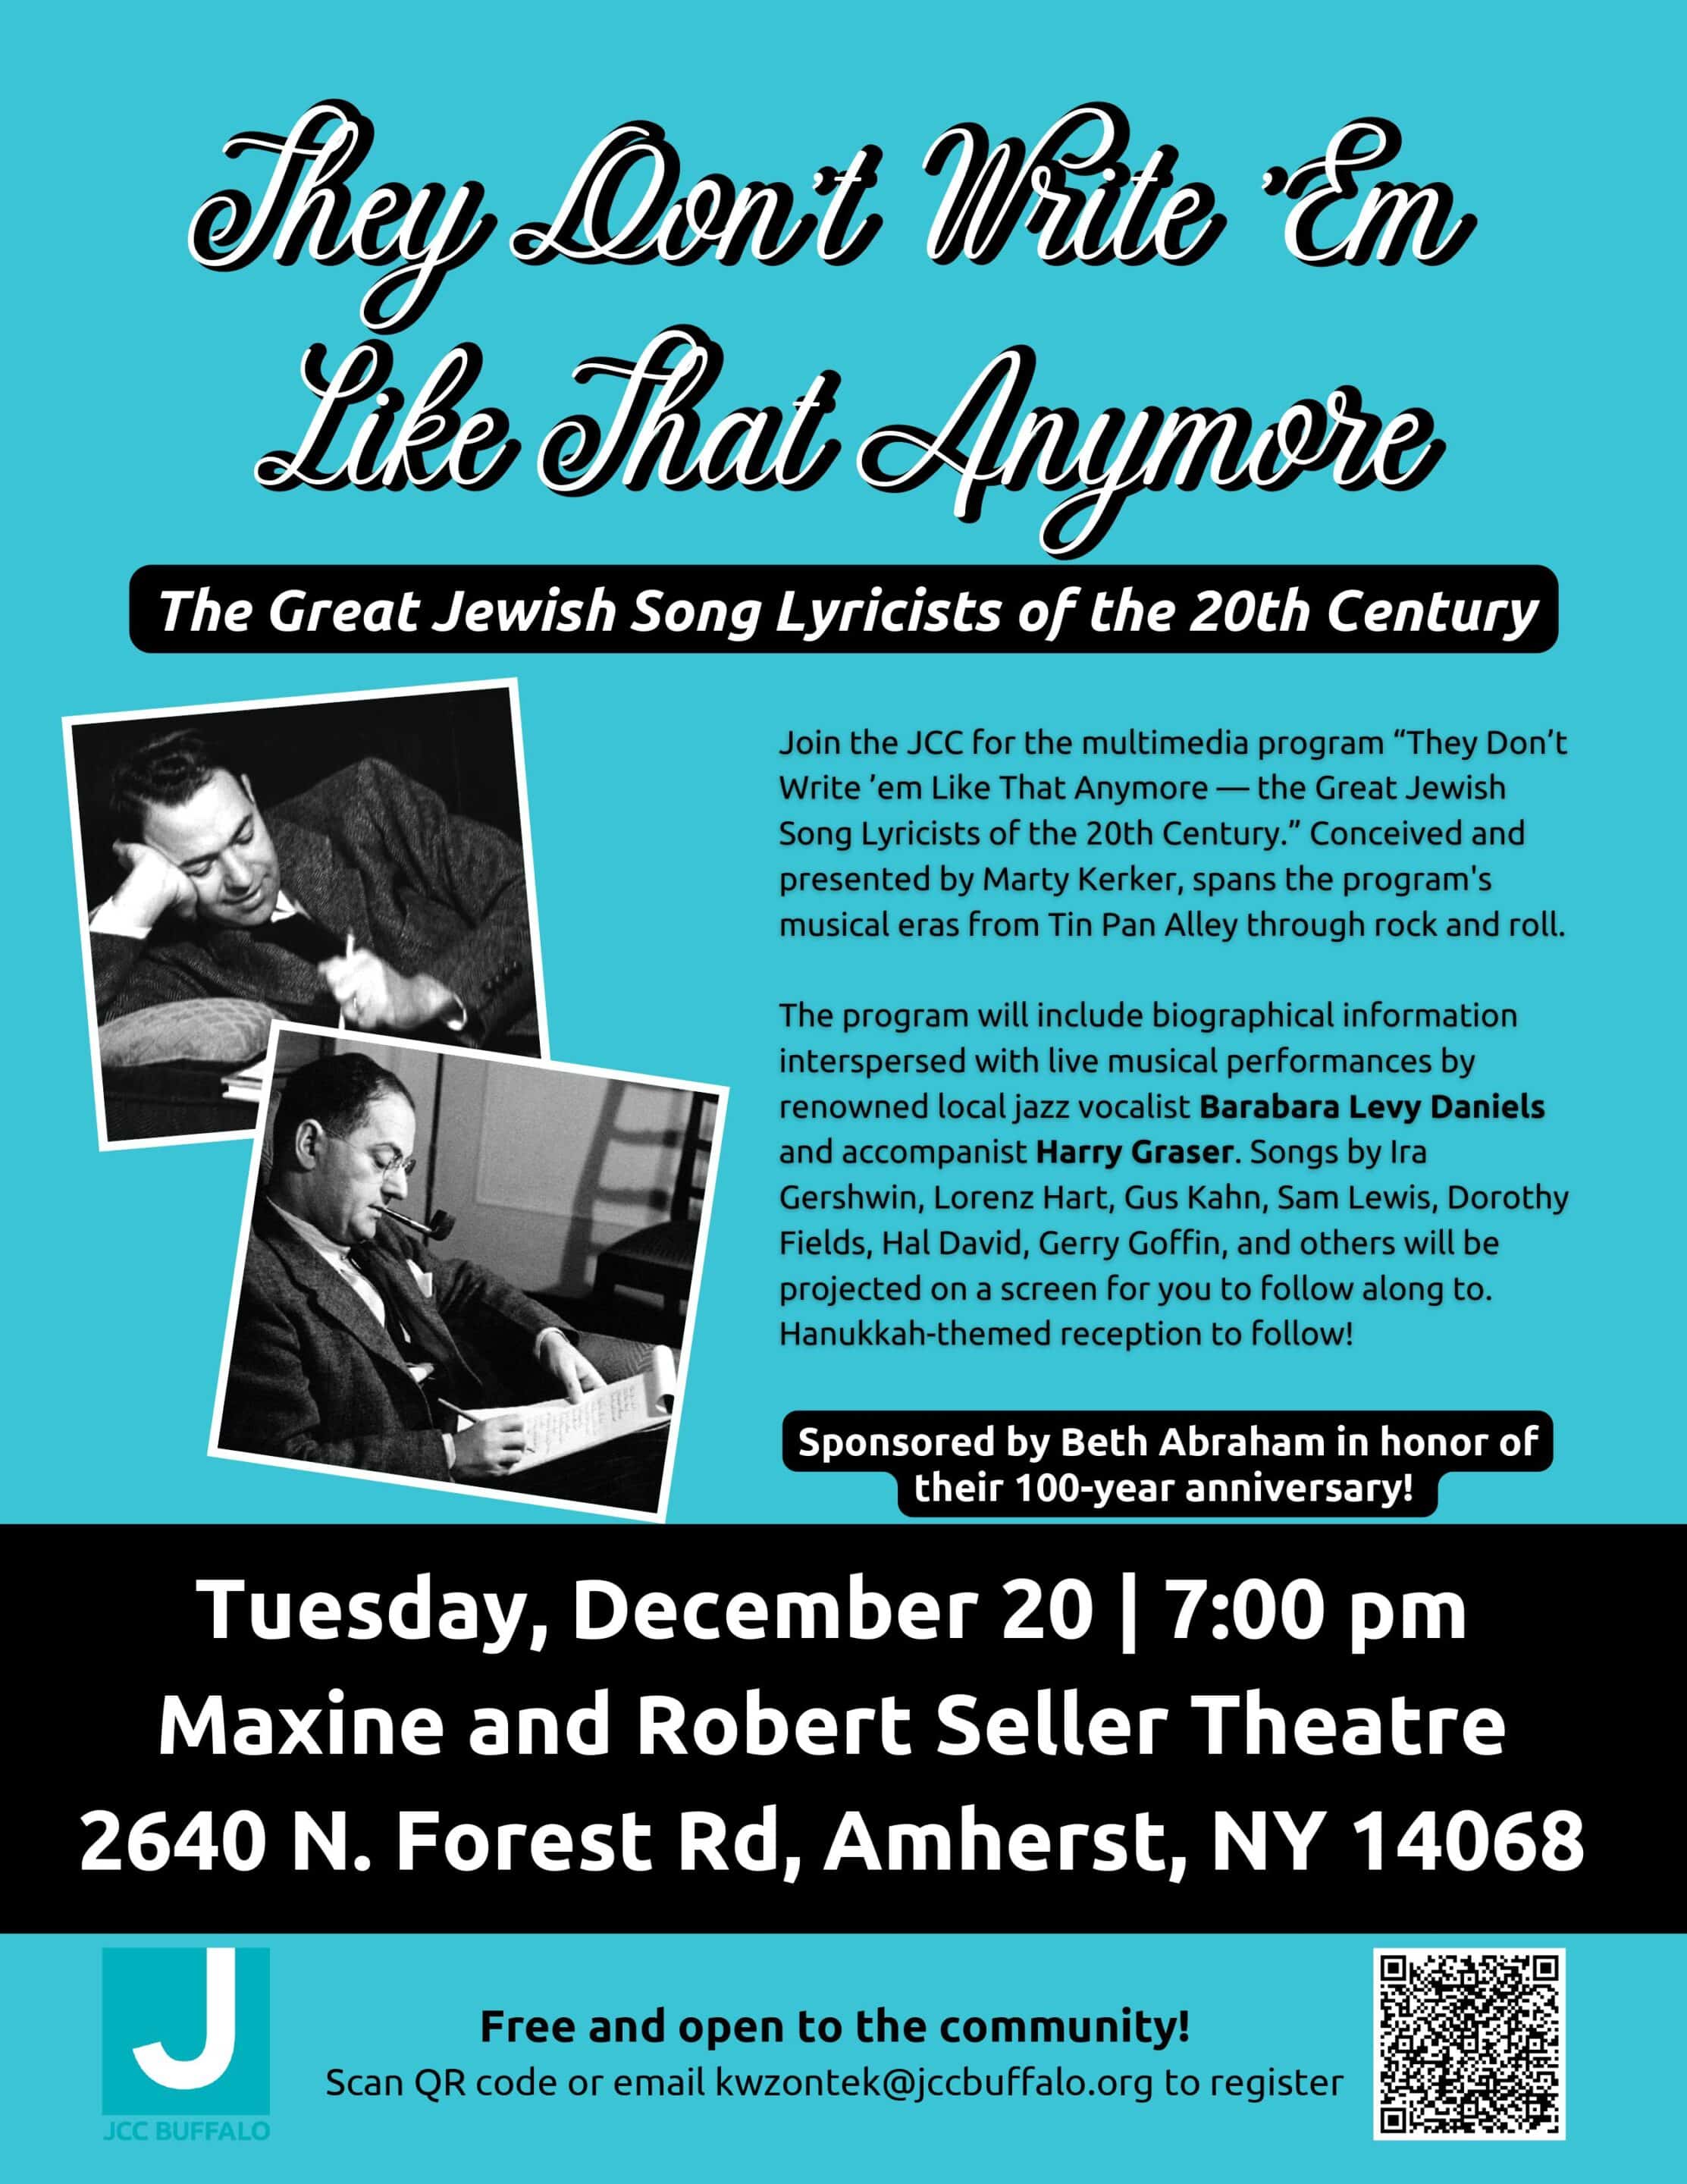 "They Don't Write 'em Like That Anymore -- the Great Jewish Song Lyricists of the 20th Century" - They Dont Write Em like that anymore Flyer 7 scaled